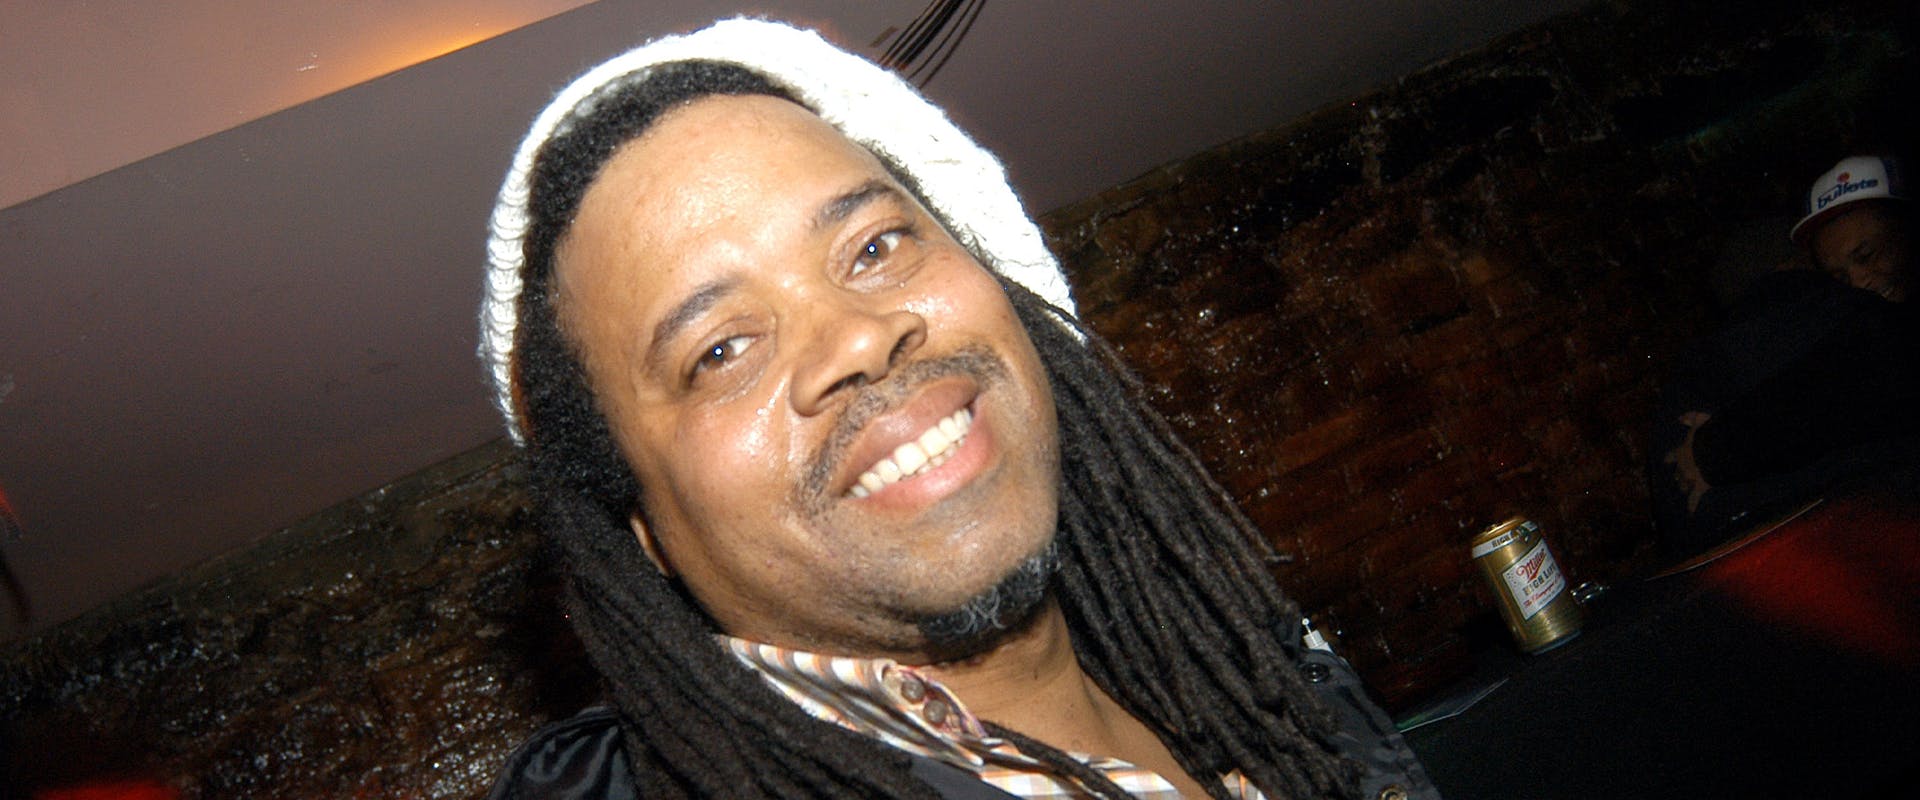 Journalist Greg Tate appears at The Delancey March 22, 2005 in New York City.